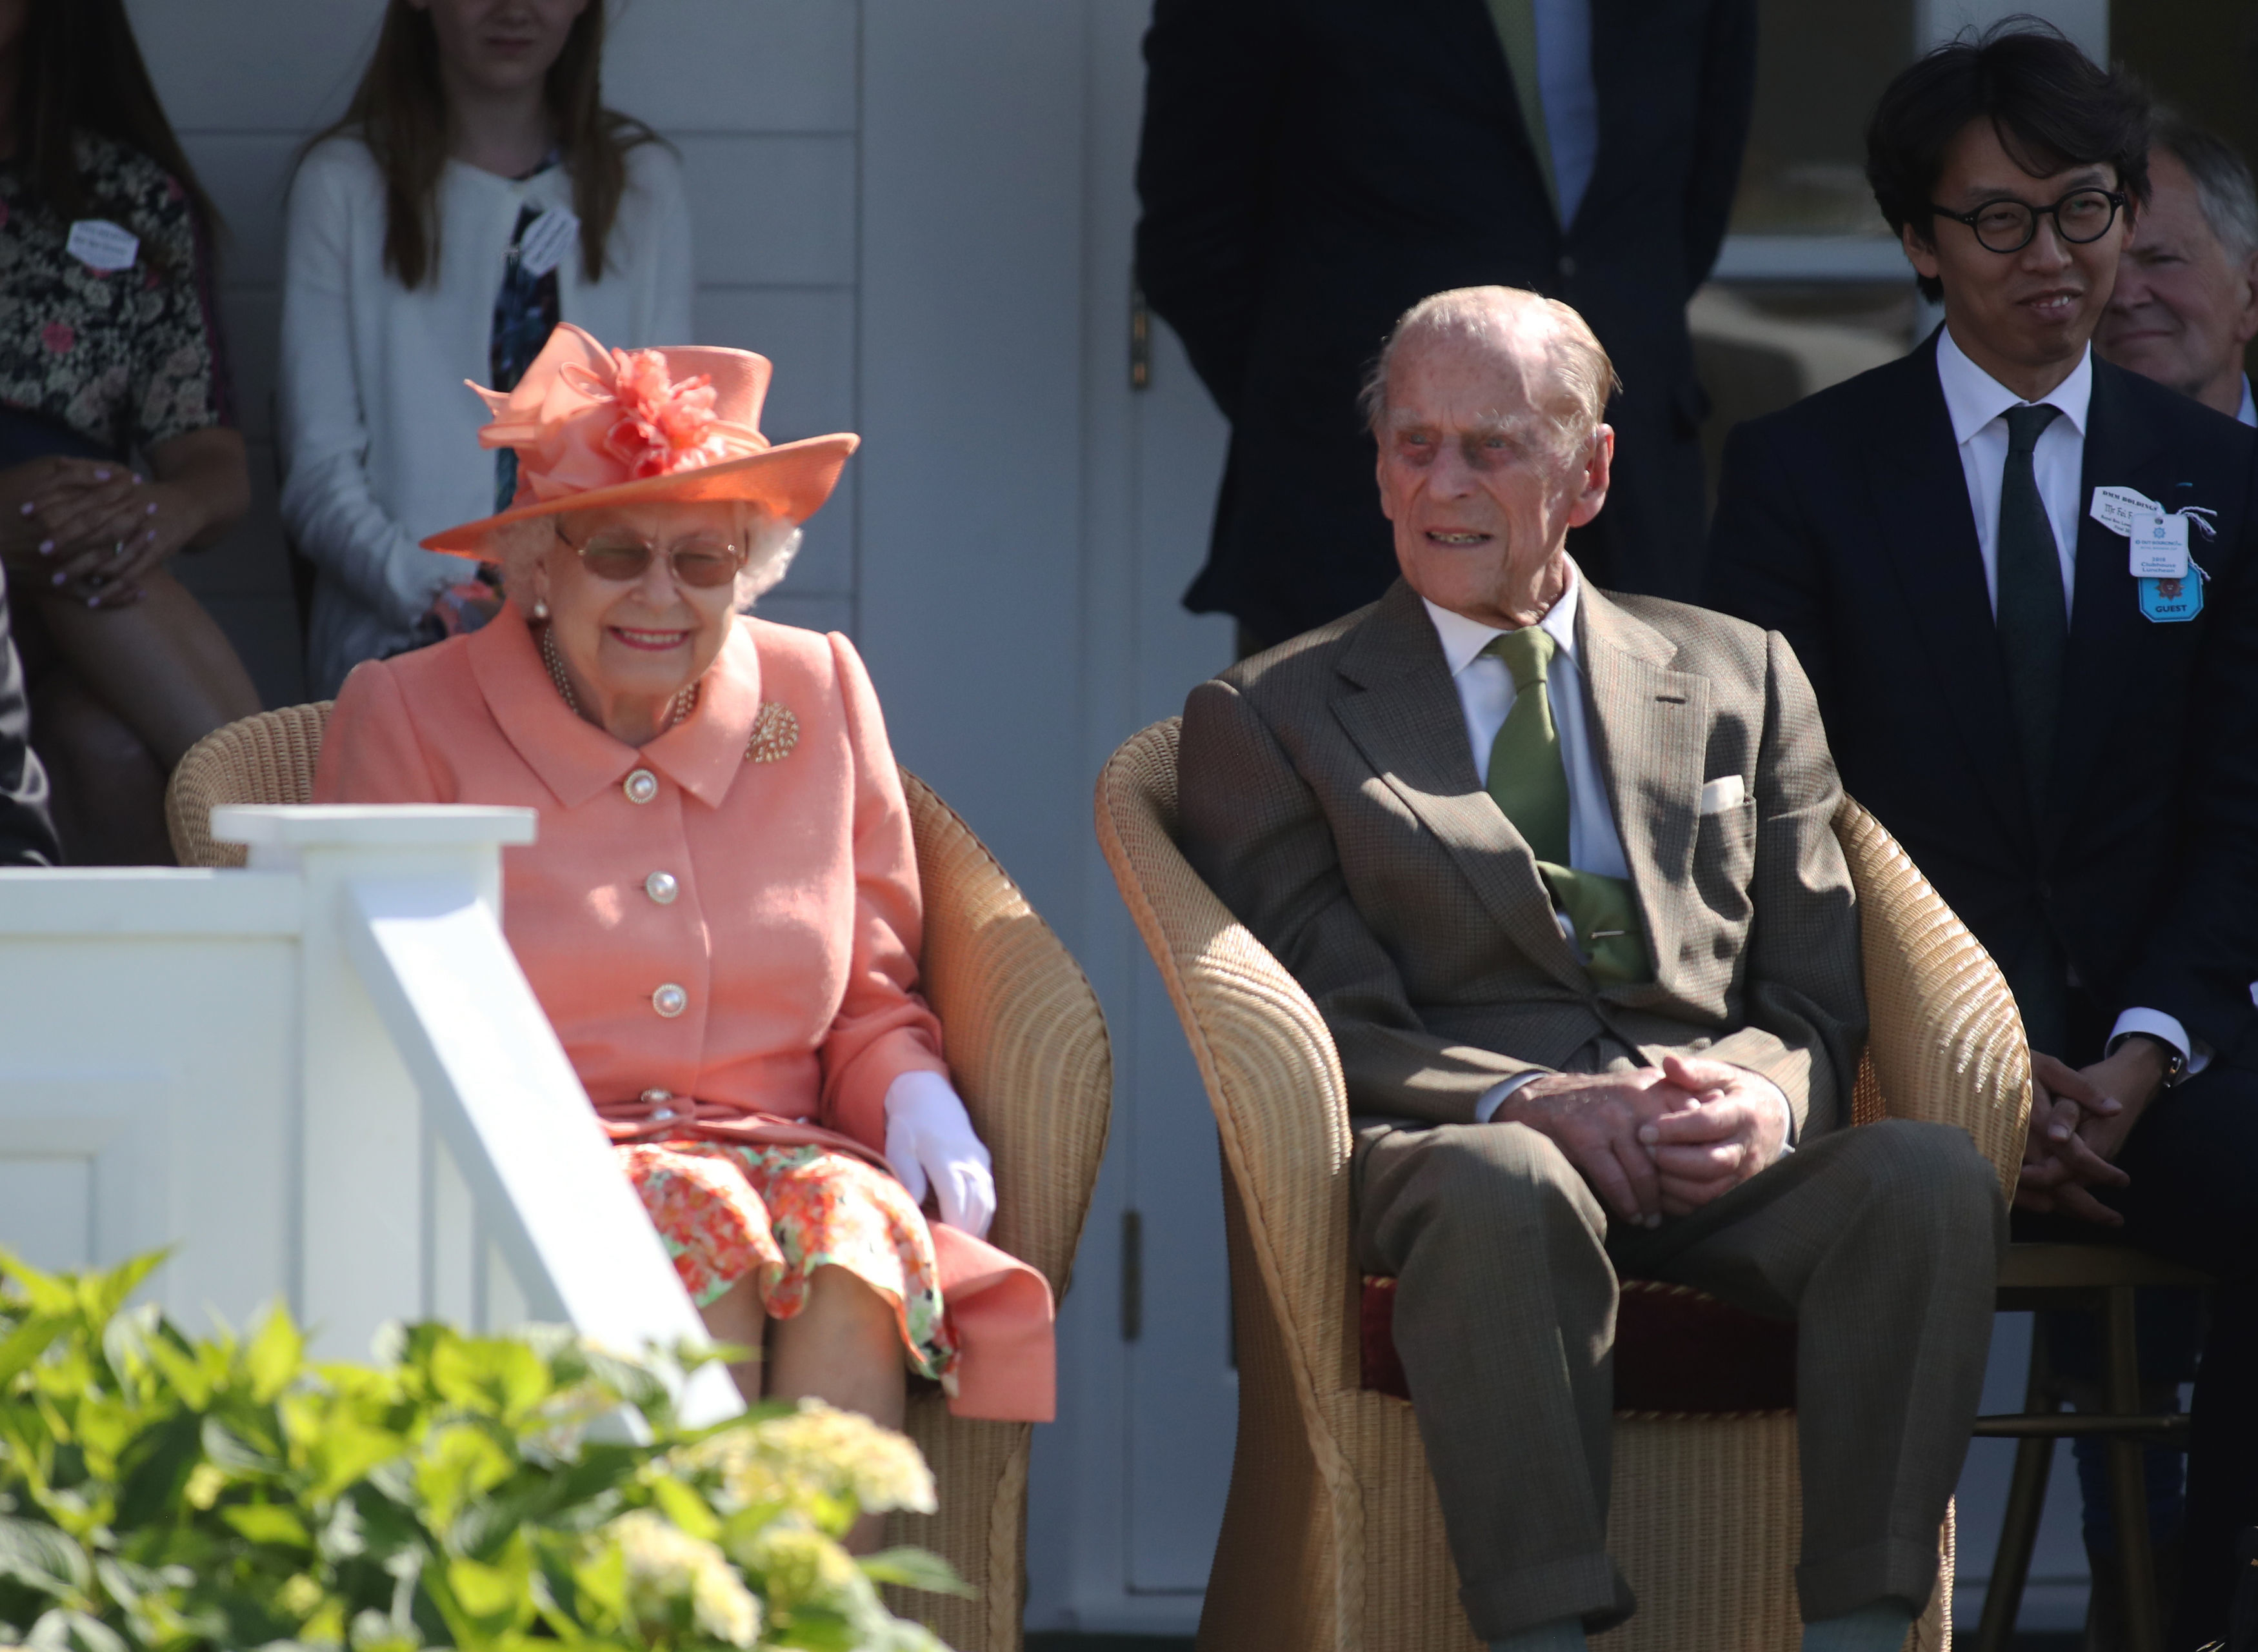 Queen Elizabeth II and The Duke of Edinburgh during the polo at the Guards Polo Club, 2018